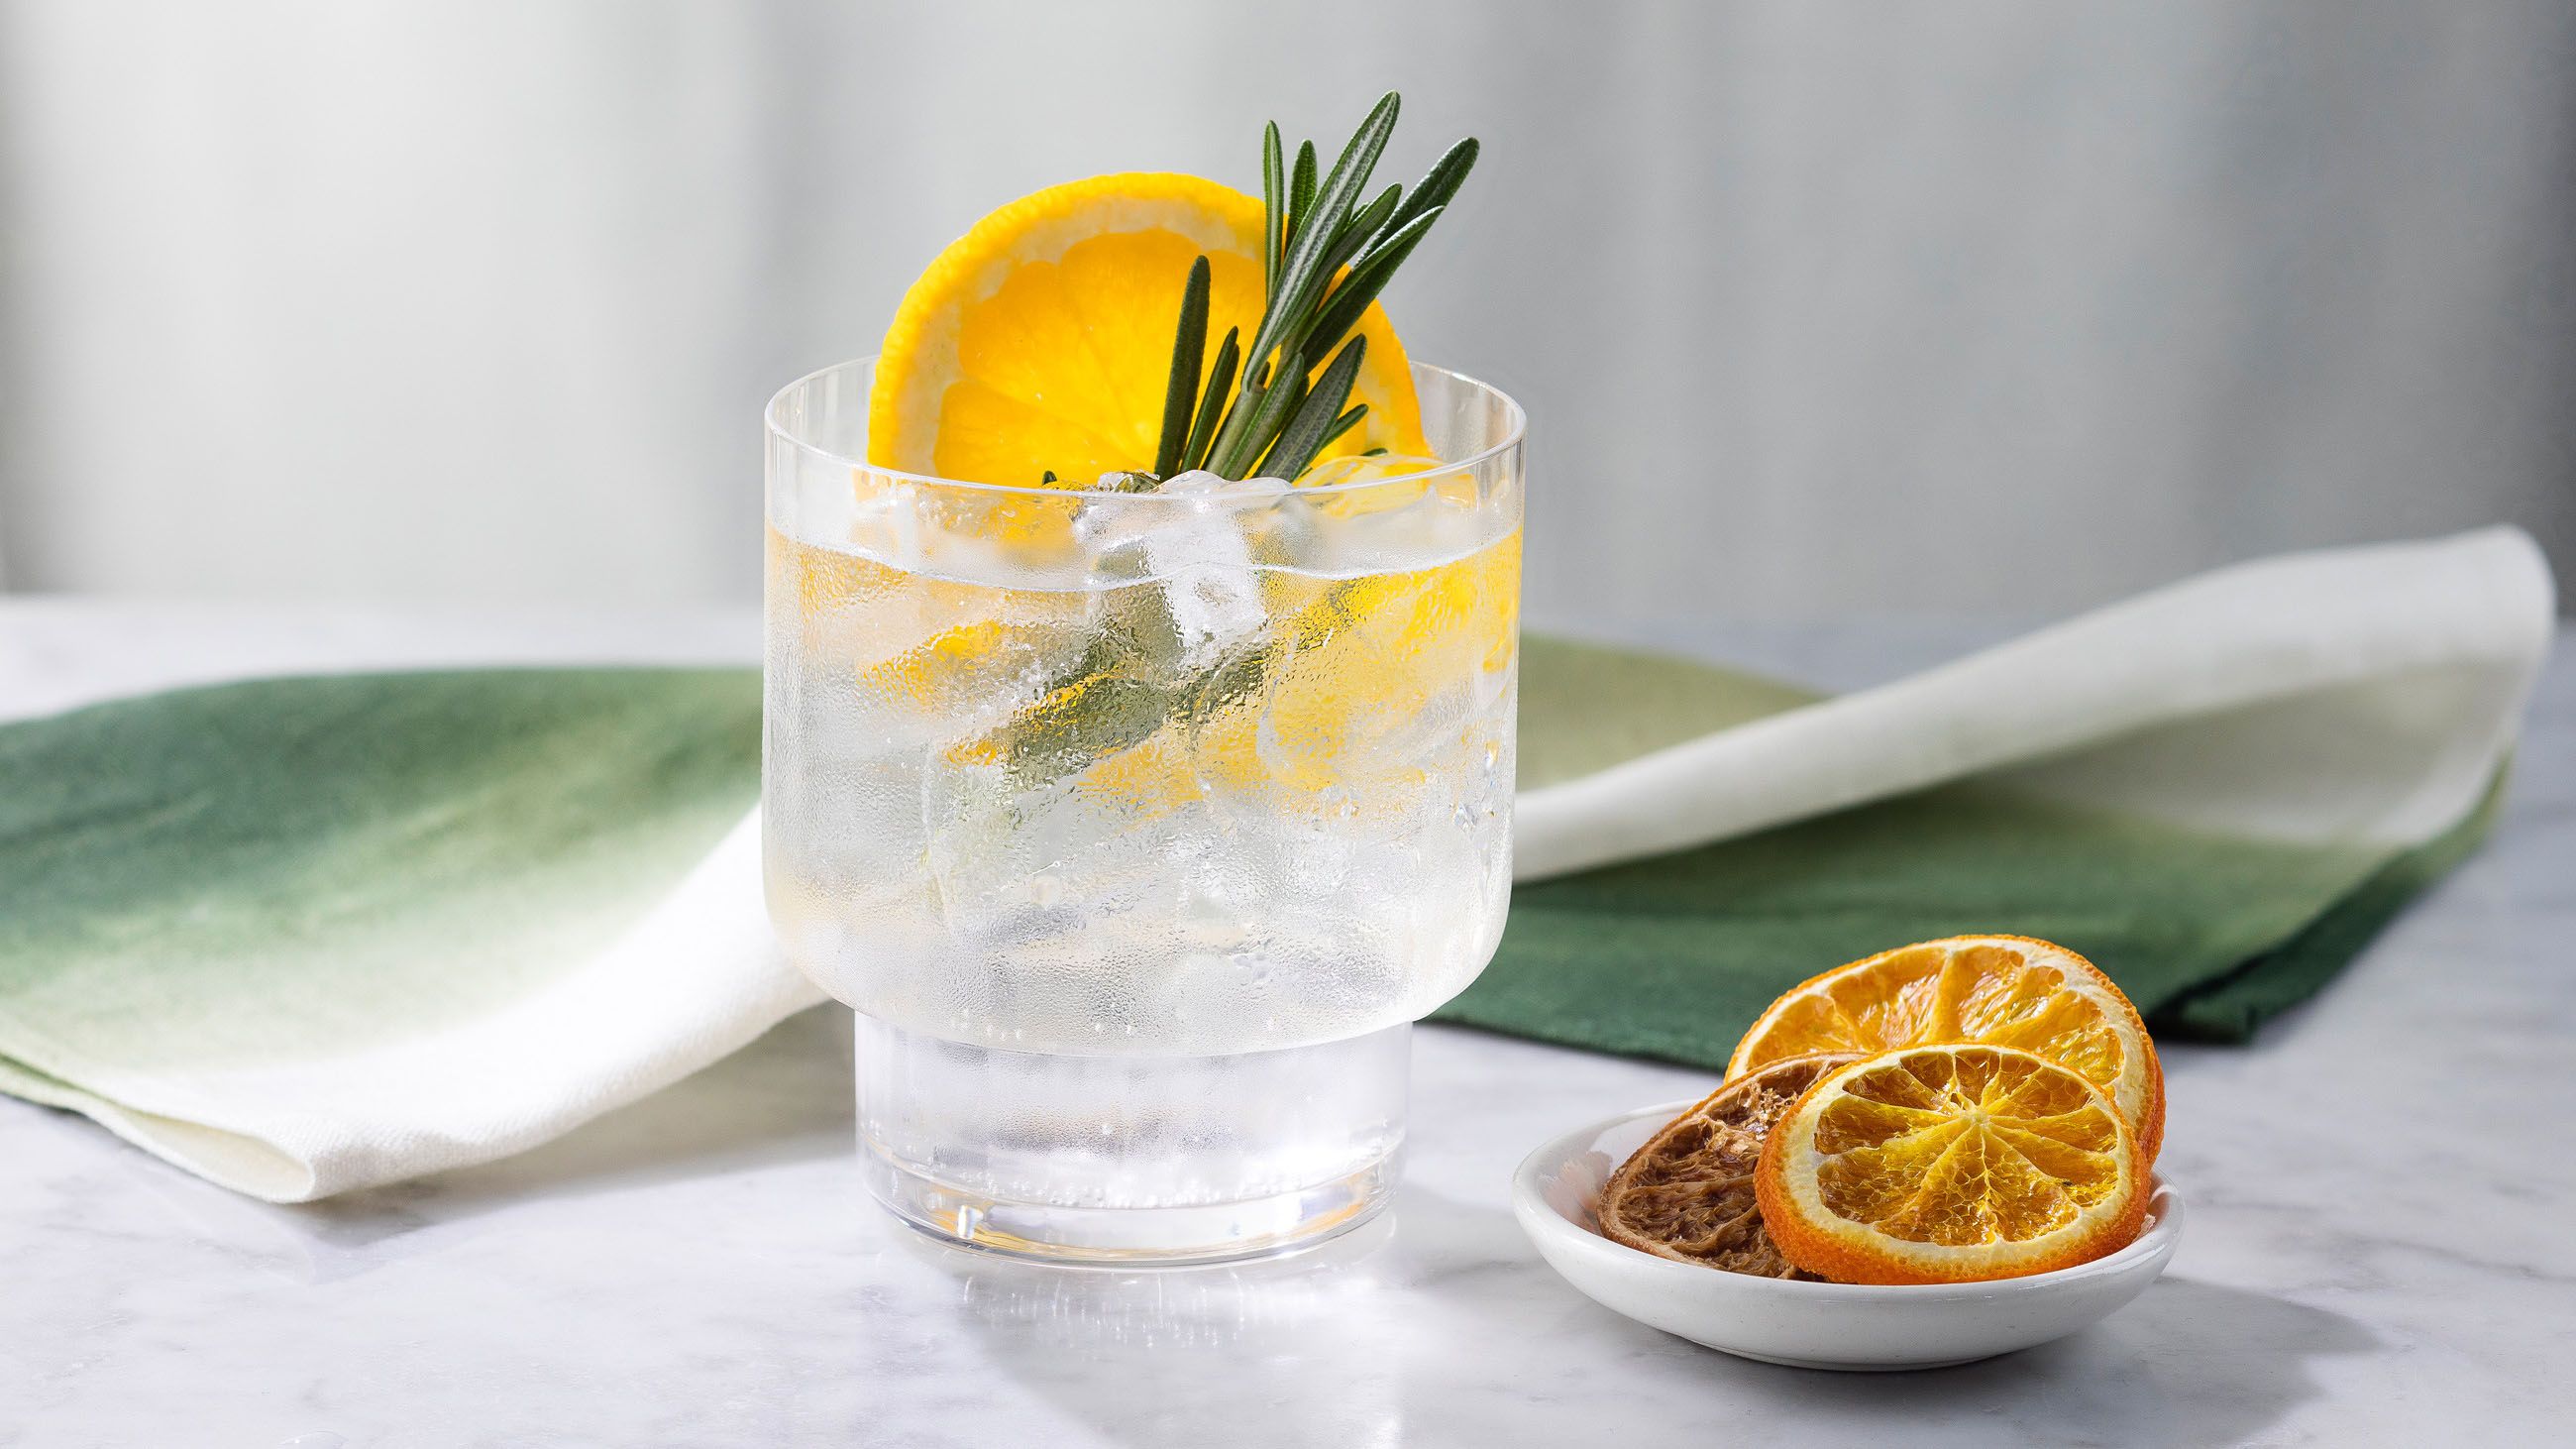 Best Gin and Tonic Recipe - How to Make a Perfect Gin and Tonic